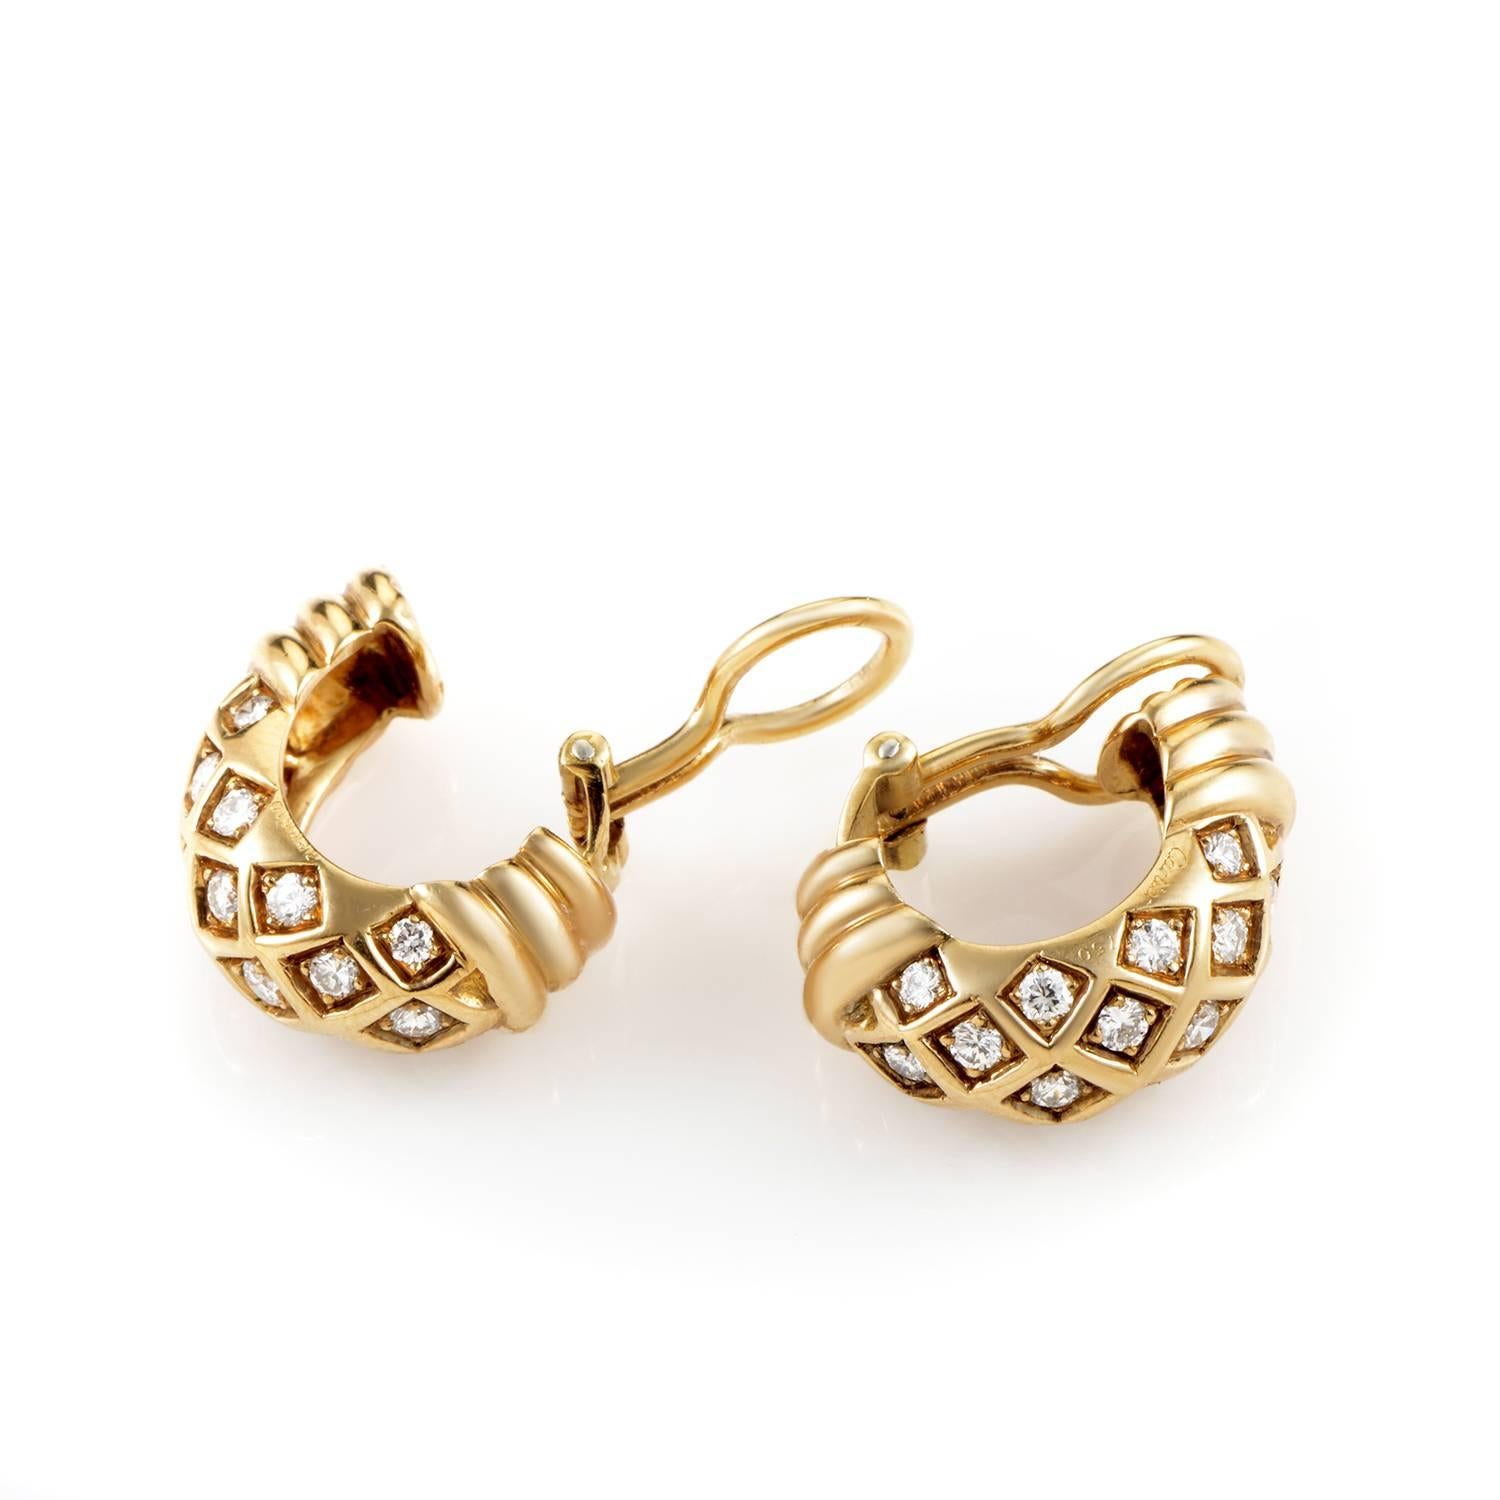 The neat diamond pattern in these nifty earrings from Cartier is fittingly embellished with fabulously glowing diamonds totaling approximately 1.10 carats, bringing scintillating life into the gracefully shaped 18K yellow gold.
Included Items: